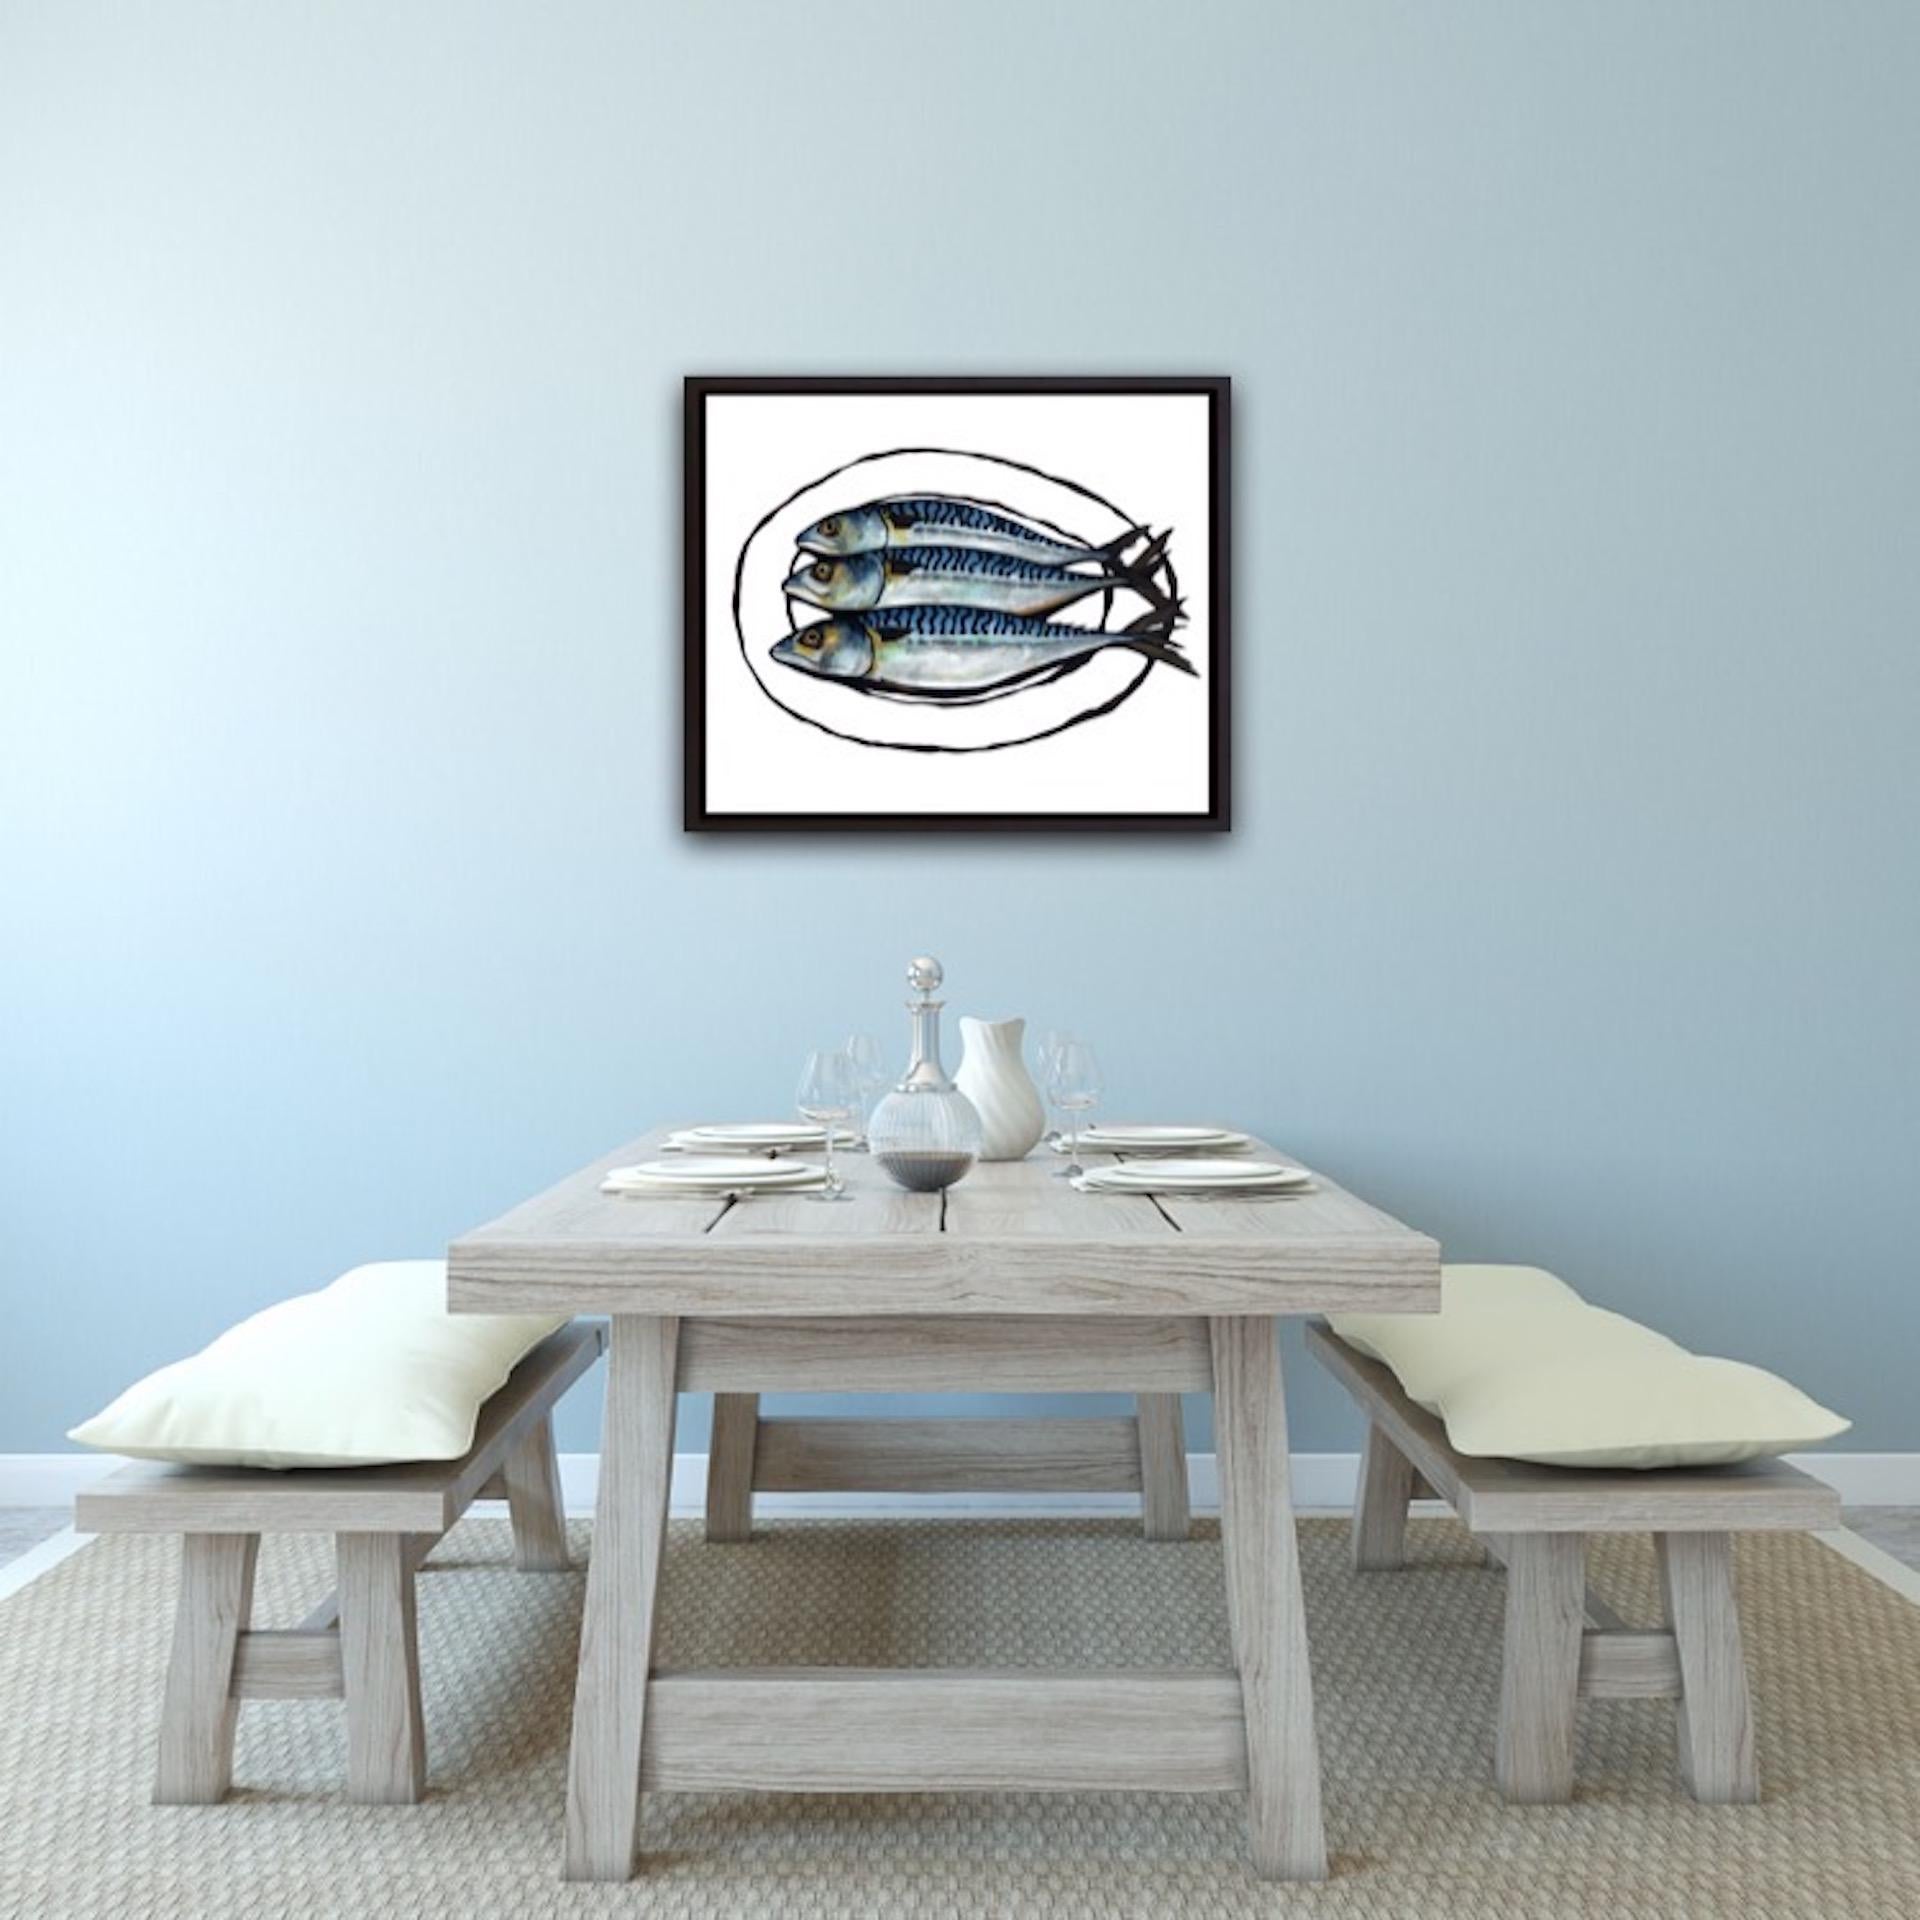 Lucy Routh
Three Mackerel
Limited Edition Giclee Still Life Print
Edition of 100
Image Size: H 28cm x W 40cm
Mount Size: H 50cm x W 60cm x D 0.5cm
Please note that insitu images are purely an indication of how a work may look.

Three Mackerel is a